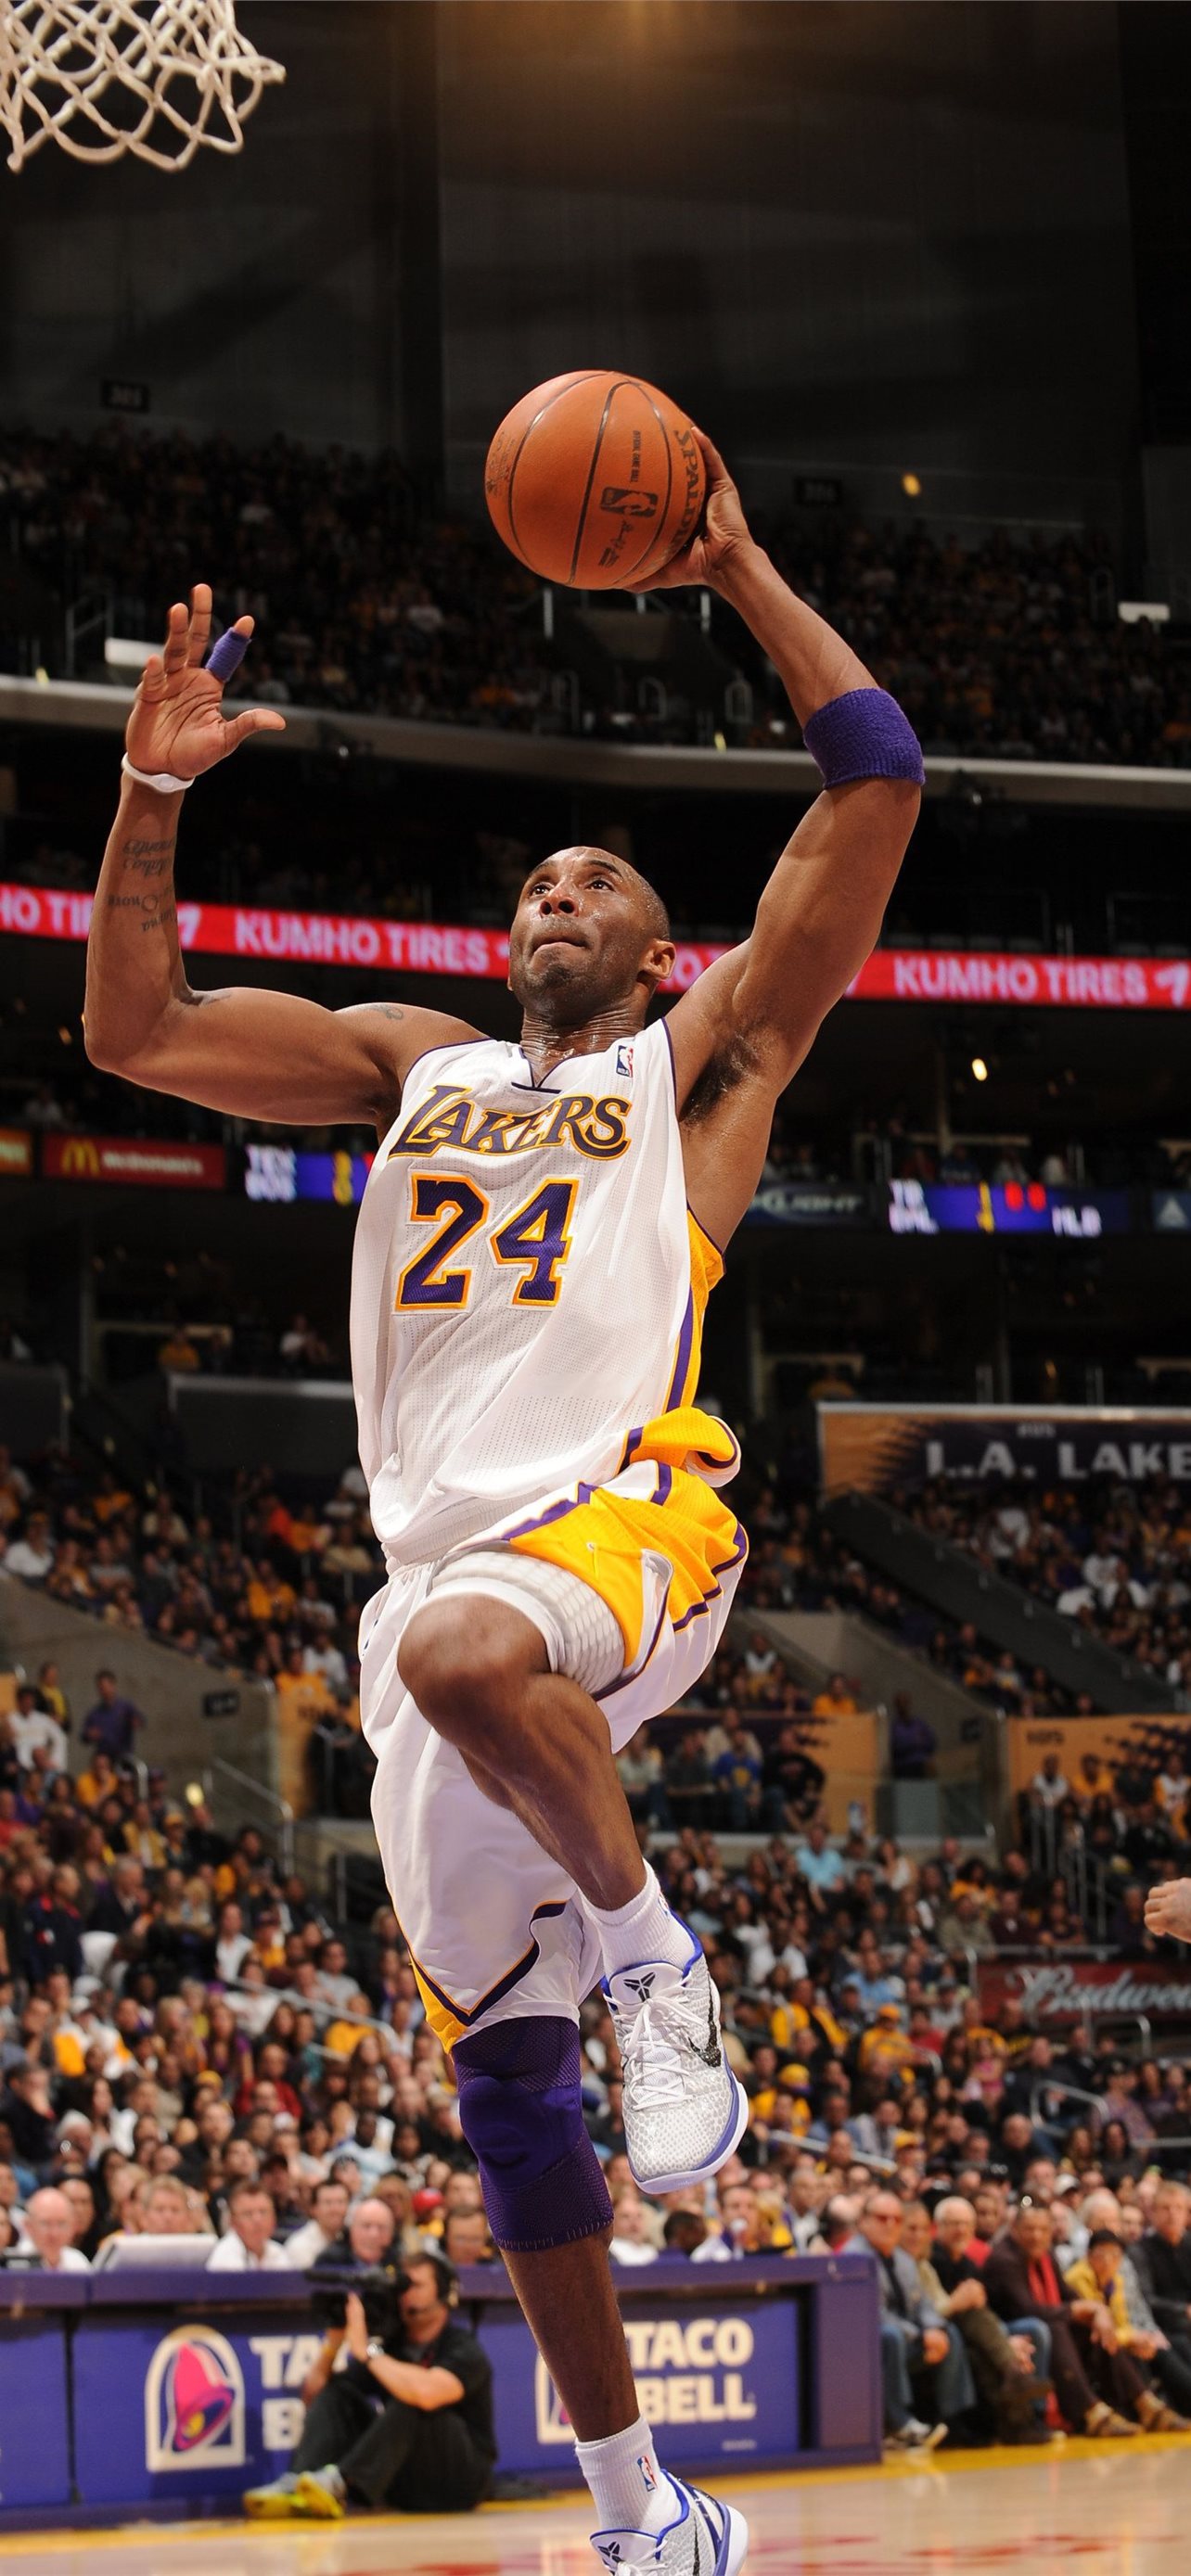 basketball kobe bryant – Sports Basketball HD Des... iPhone Wallpapers Free  Download